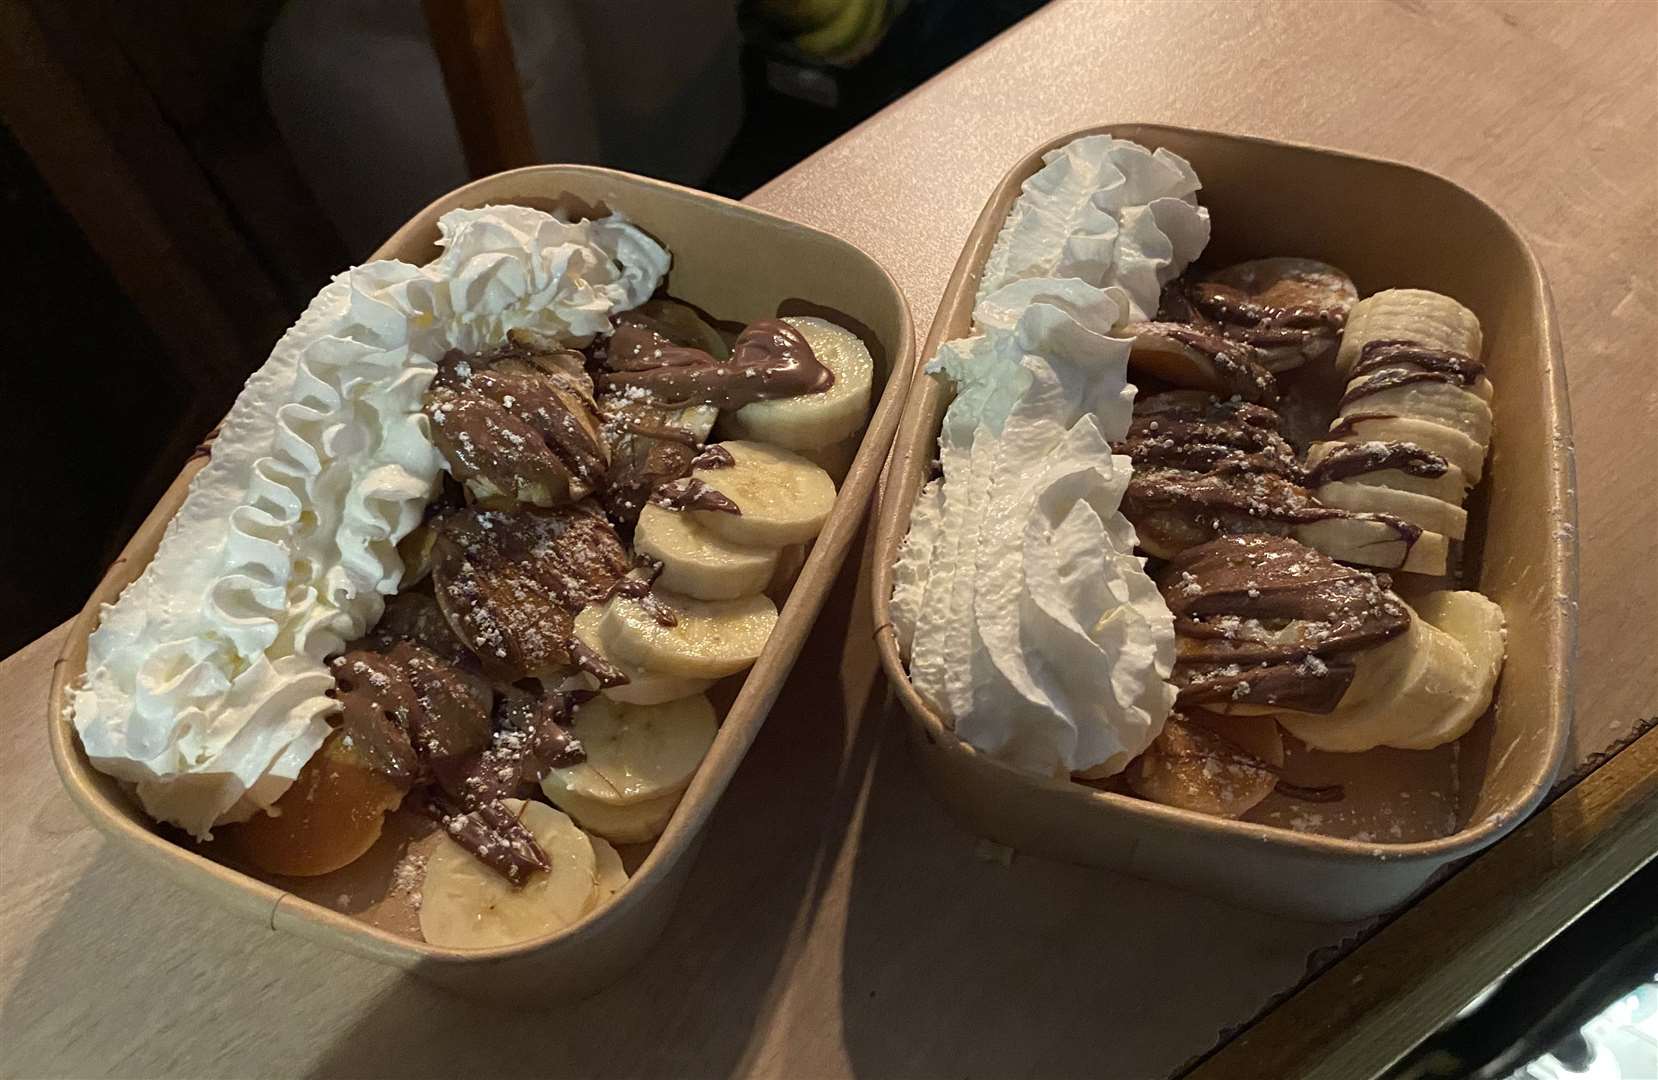 We went for the Dutch pancakes, with banana, chocolate and whipped cream toppings